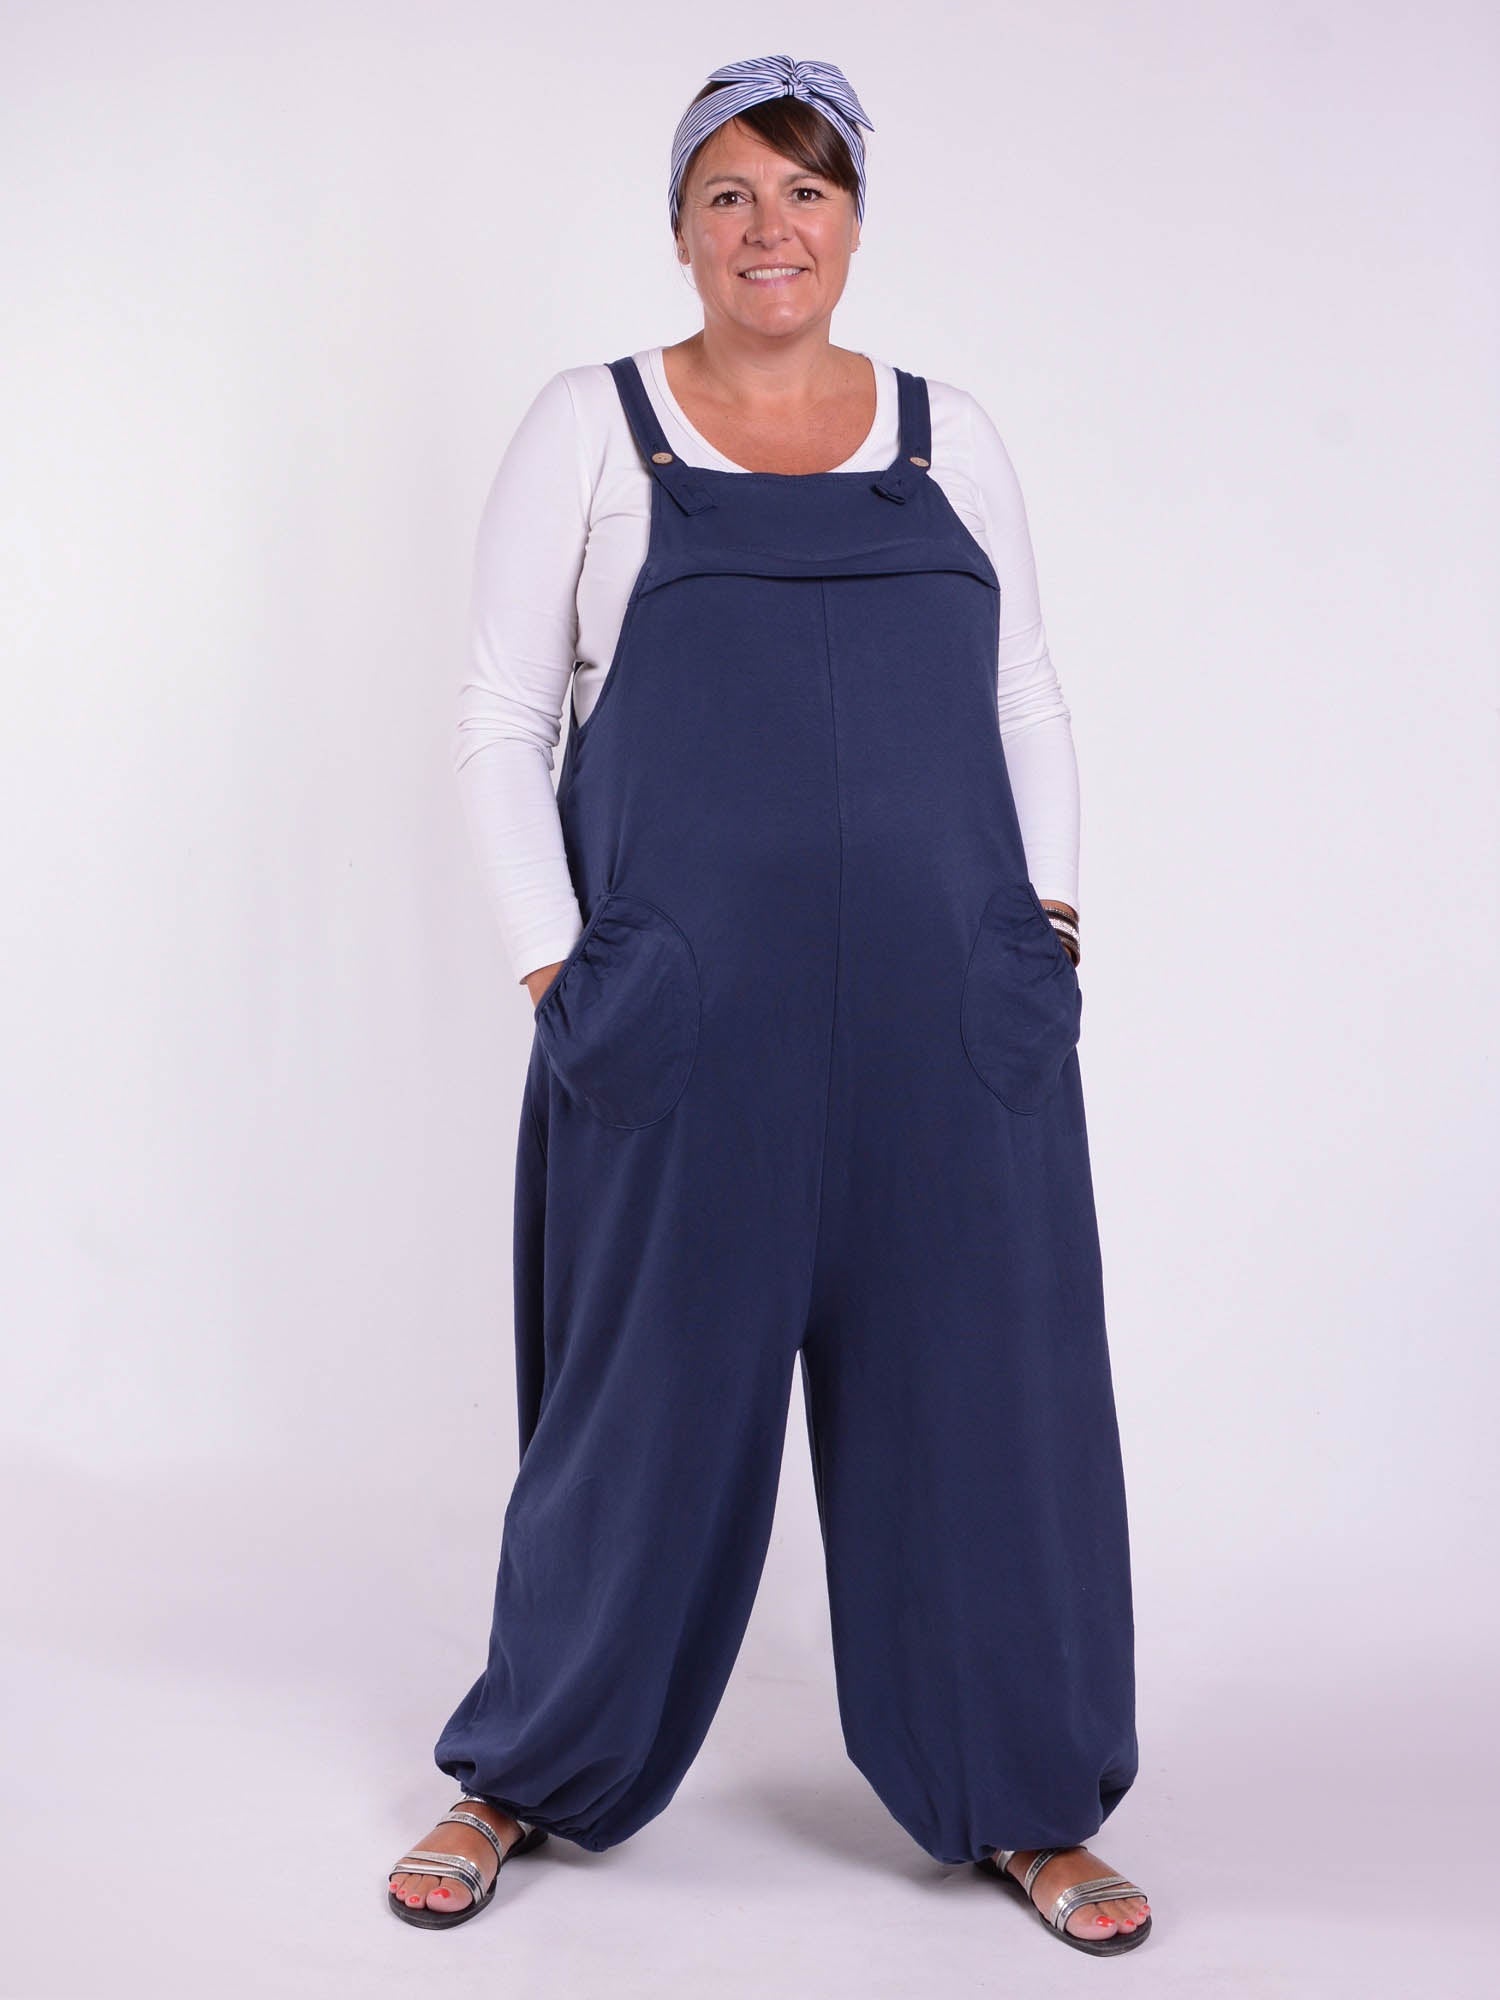 Lagenlook Cotton Dungarees - 8334, Trousers, Pure Plus Clothing, Lagenlook Clothing, Plus Size Fashion, Over 50 Fashion